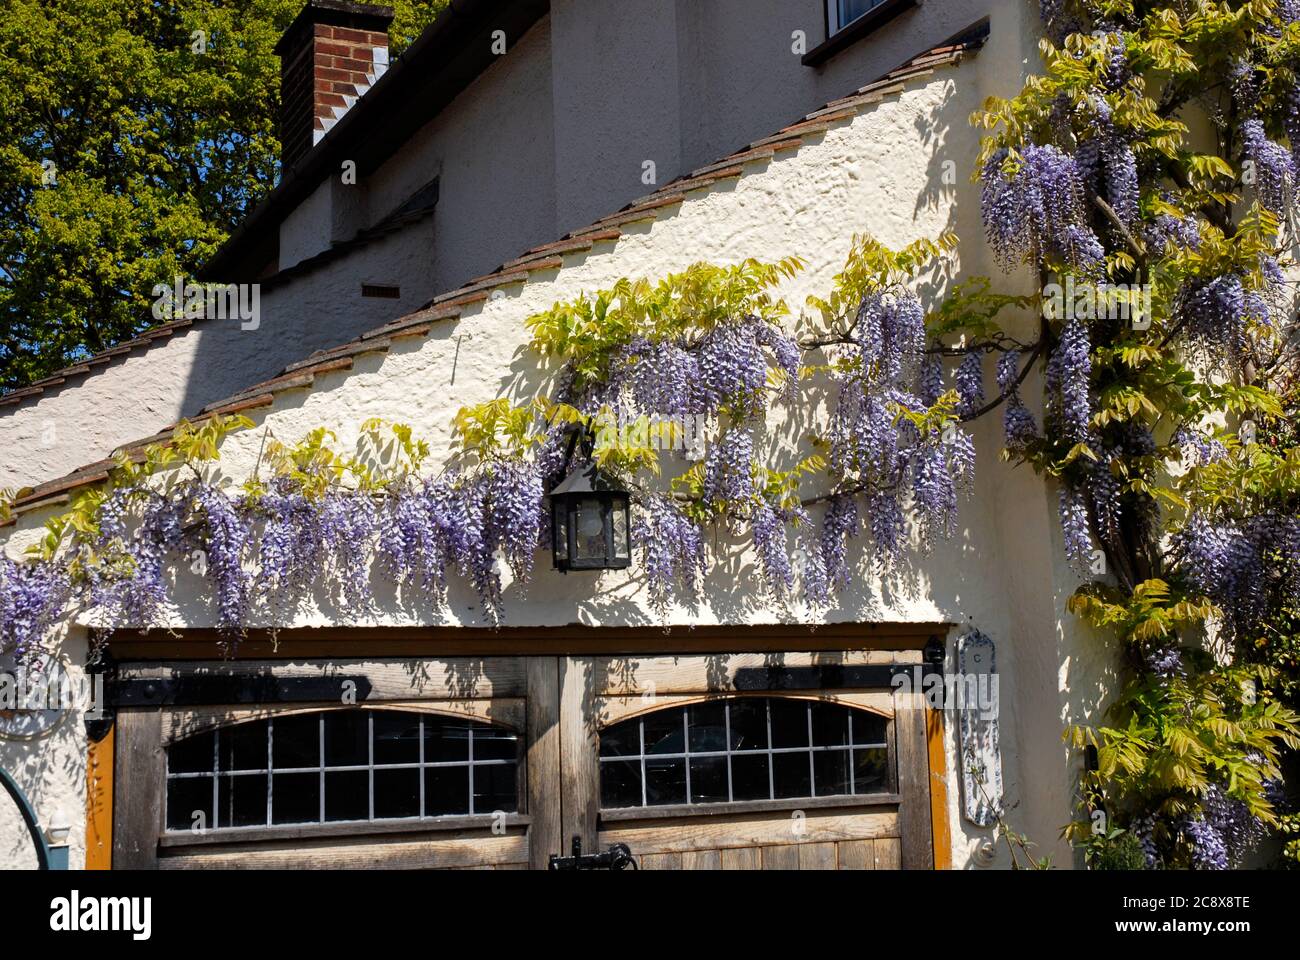 Attractive Wisteria growing in wall of domestic house, Kent, England Stock Photo